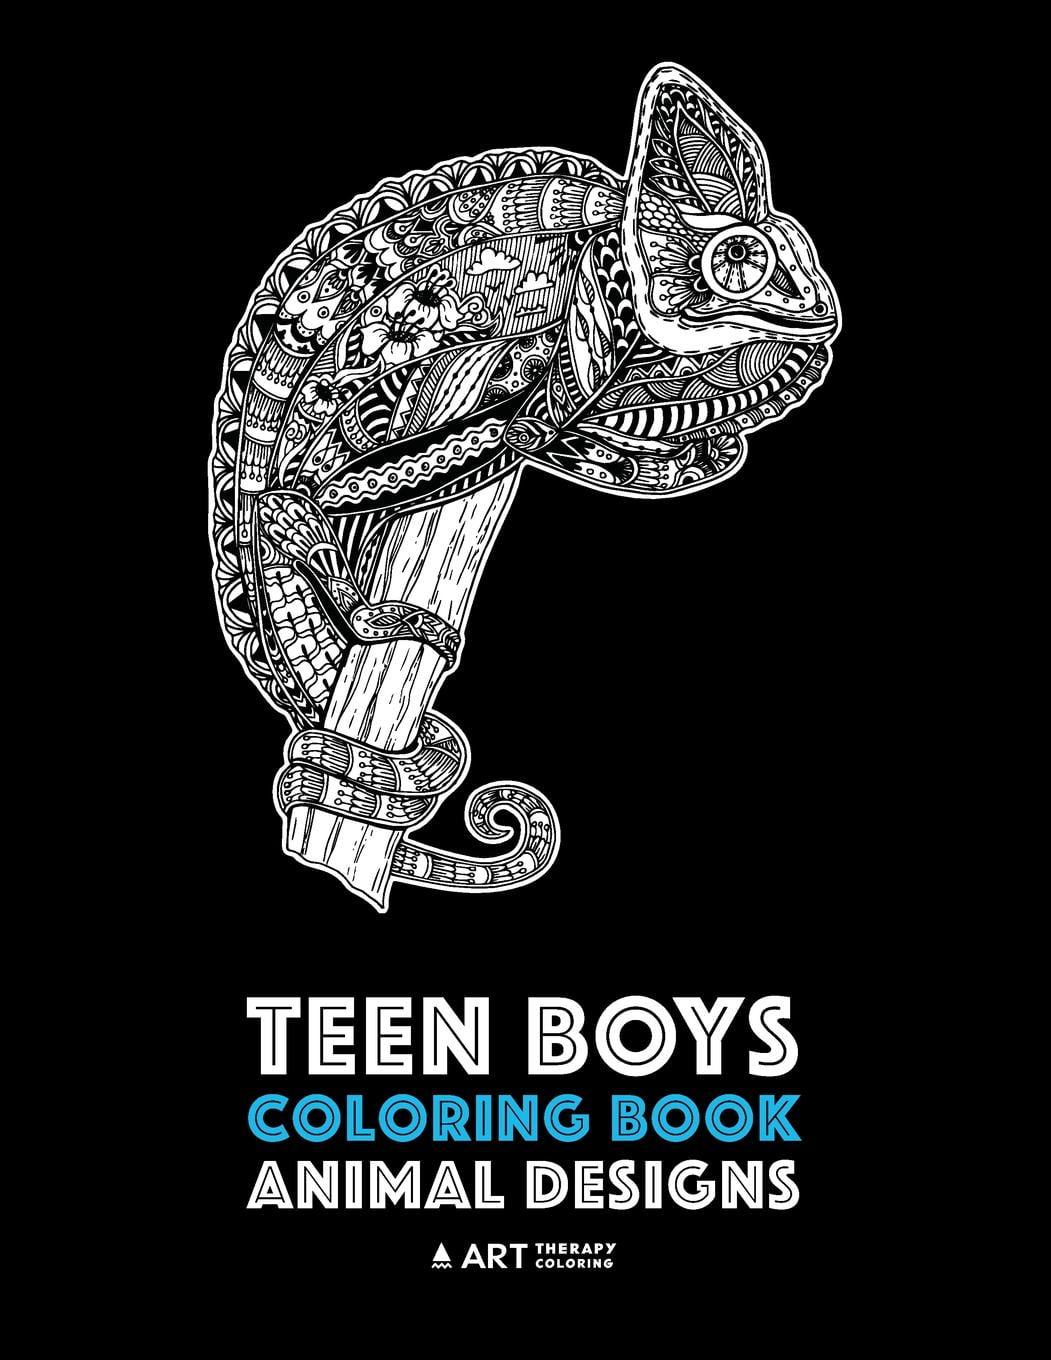 Teen Boys Coloring Book Animal Designs Complex Animal Drawings for
Older Boys Teenagers Zendoodle Lions Wolves Bears Snakes Spiders
Scorpions More Epub-Ebook